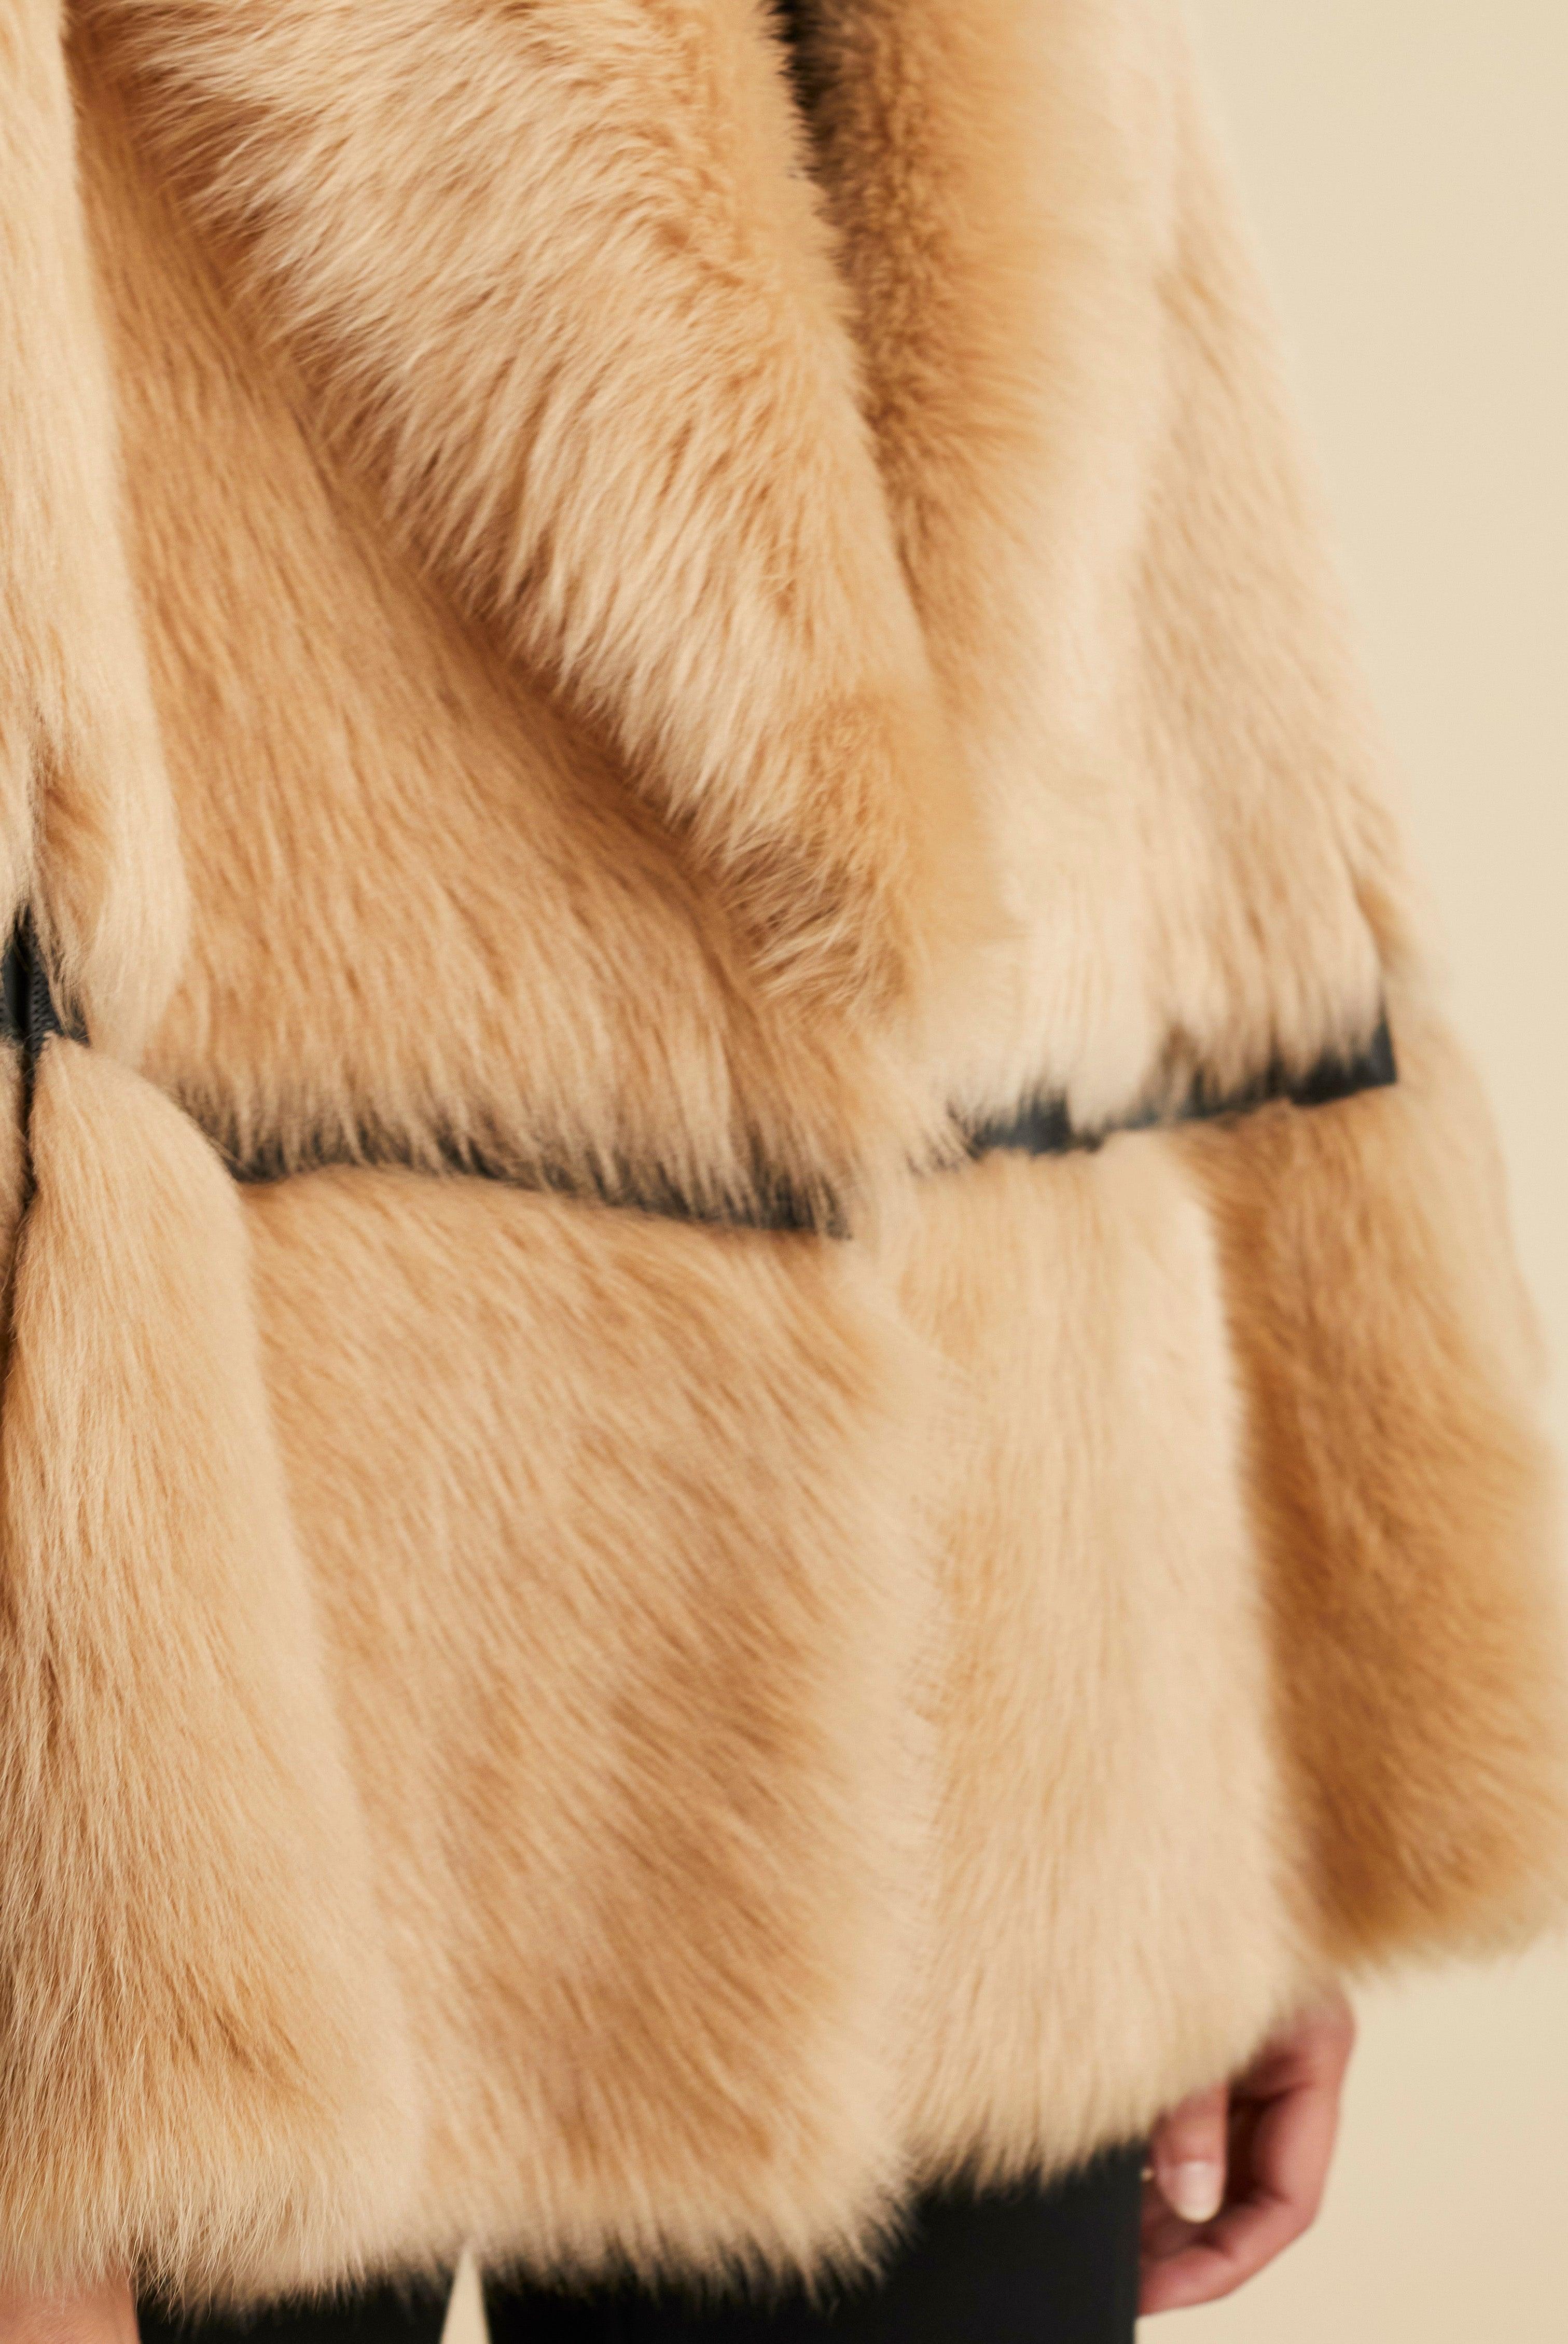 The Adelaide Shearling Jacket in Natural - The Iconic Issue